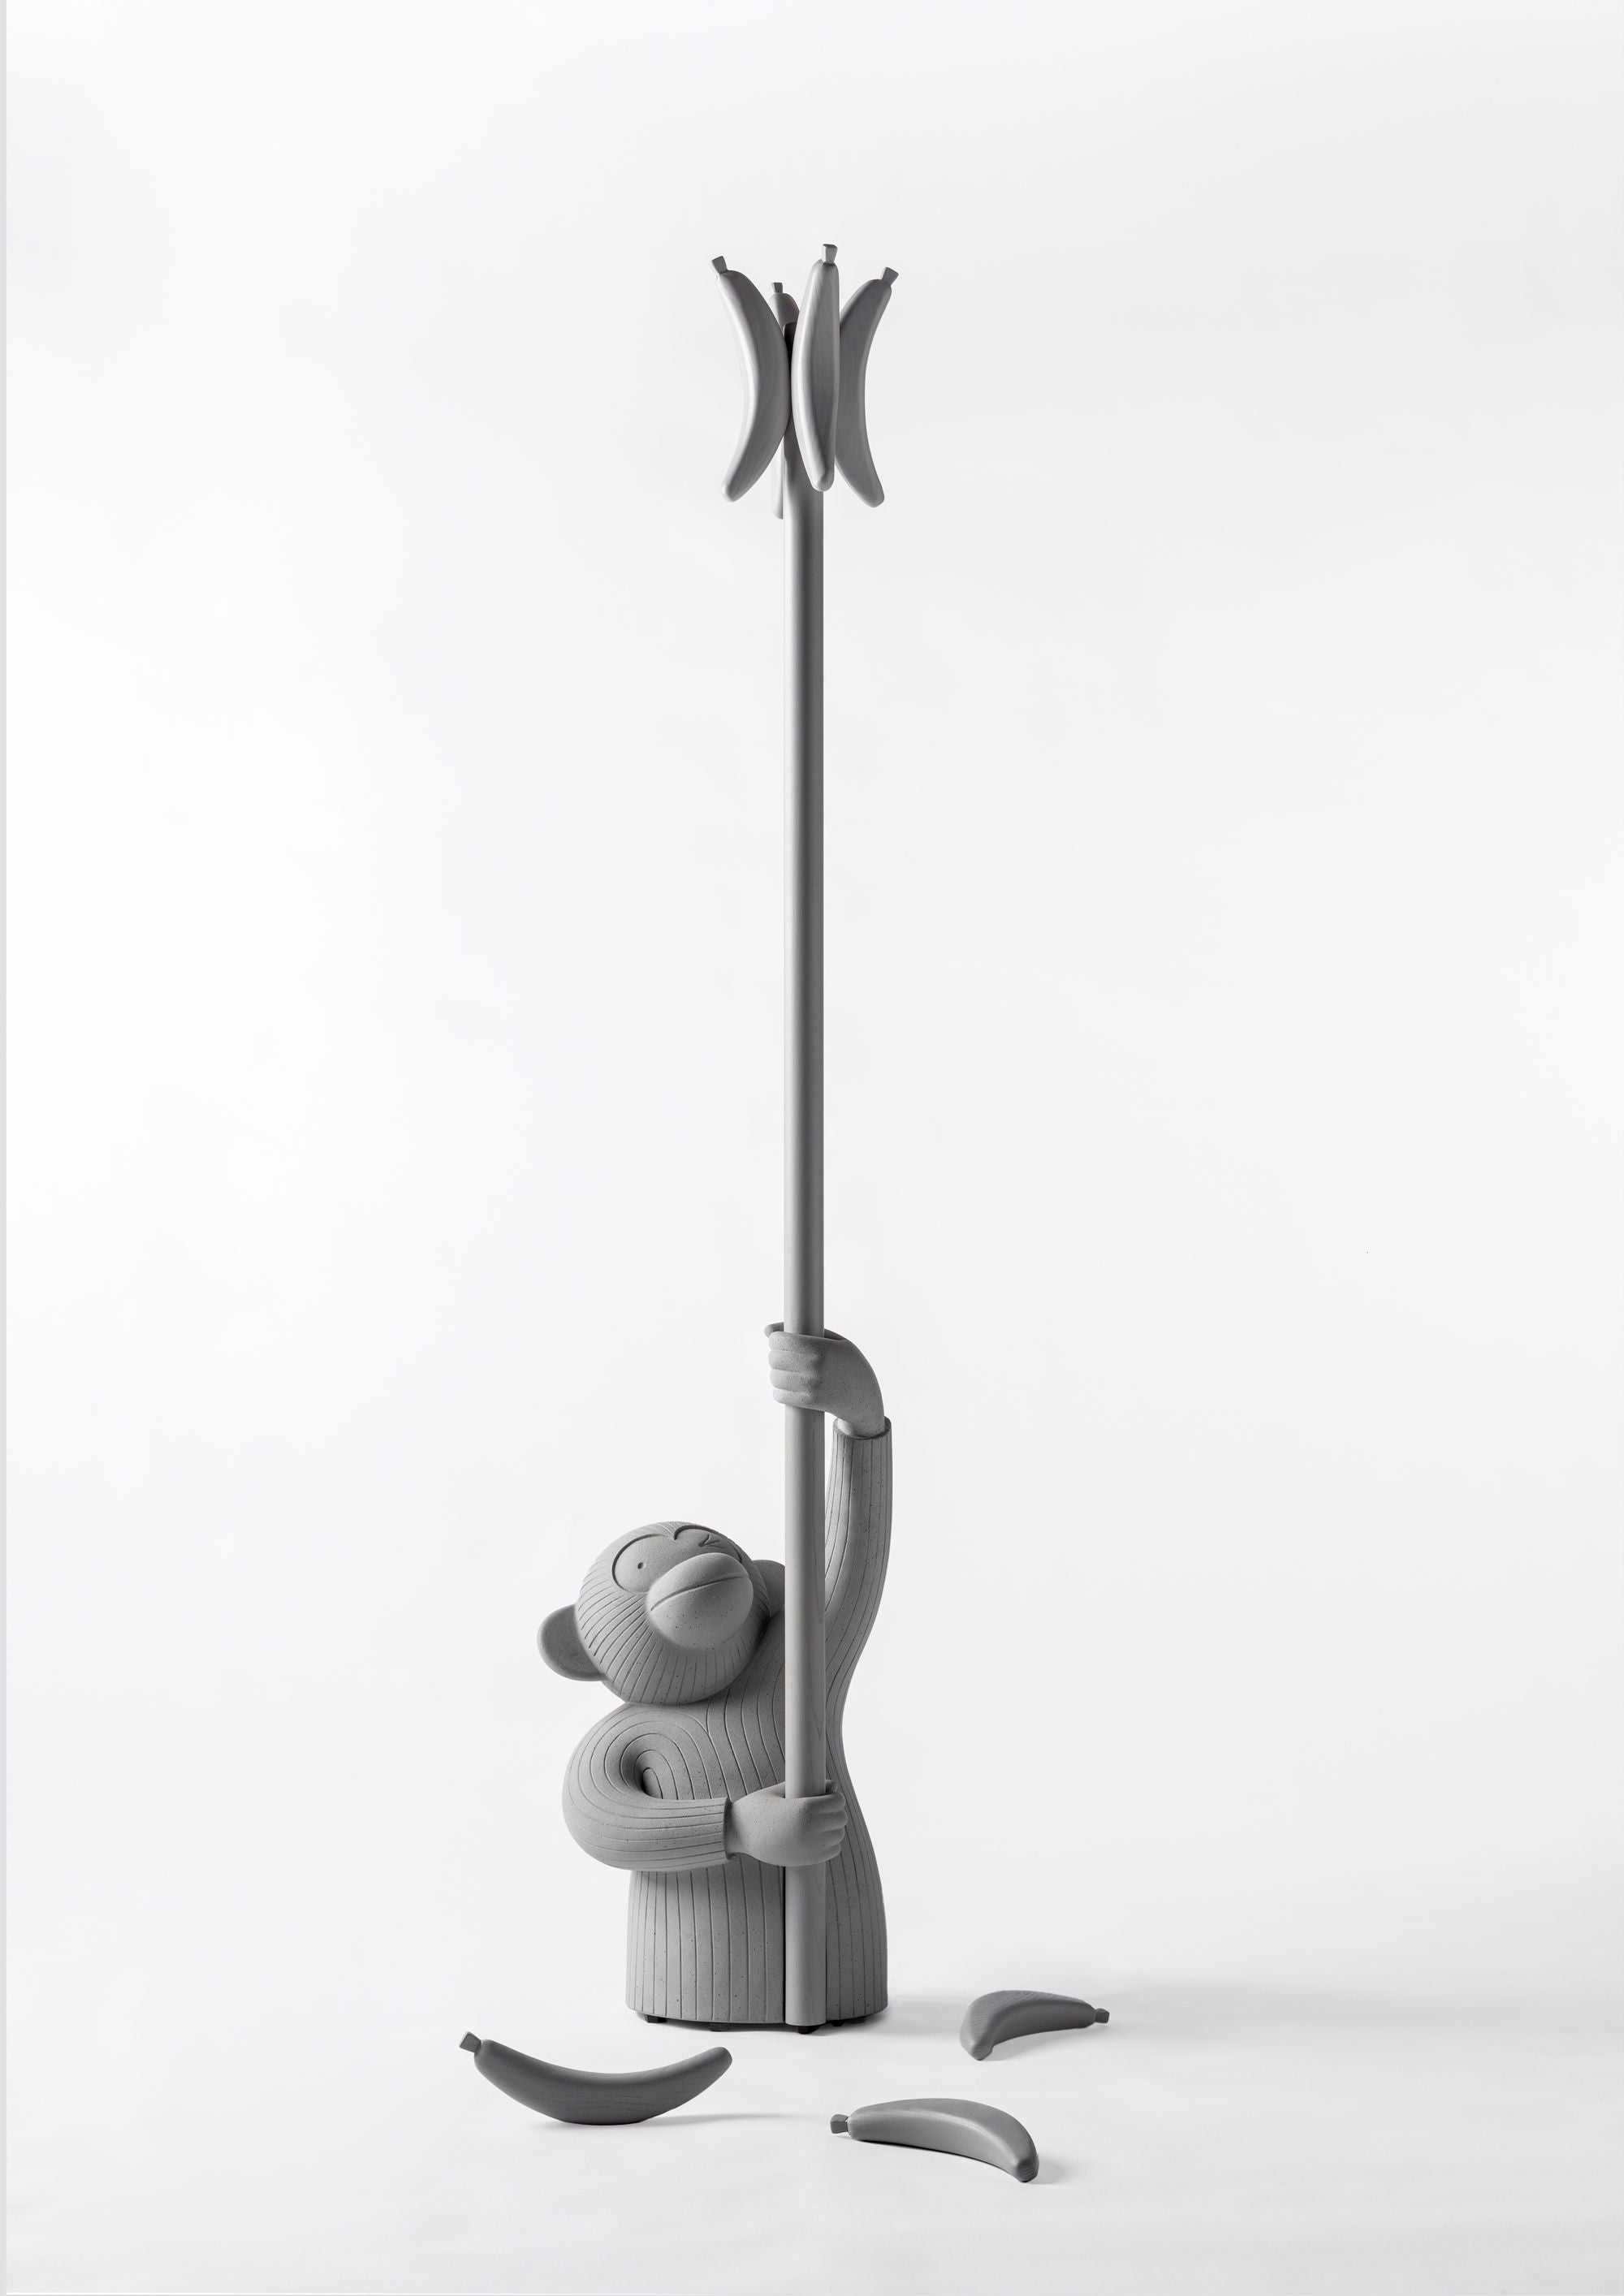 Coat stand monkey by Jaime Hayon